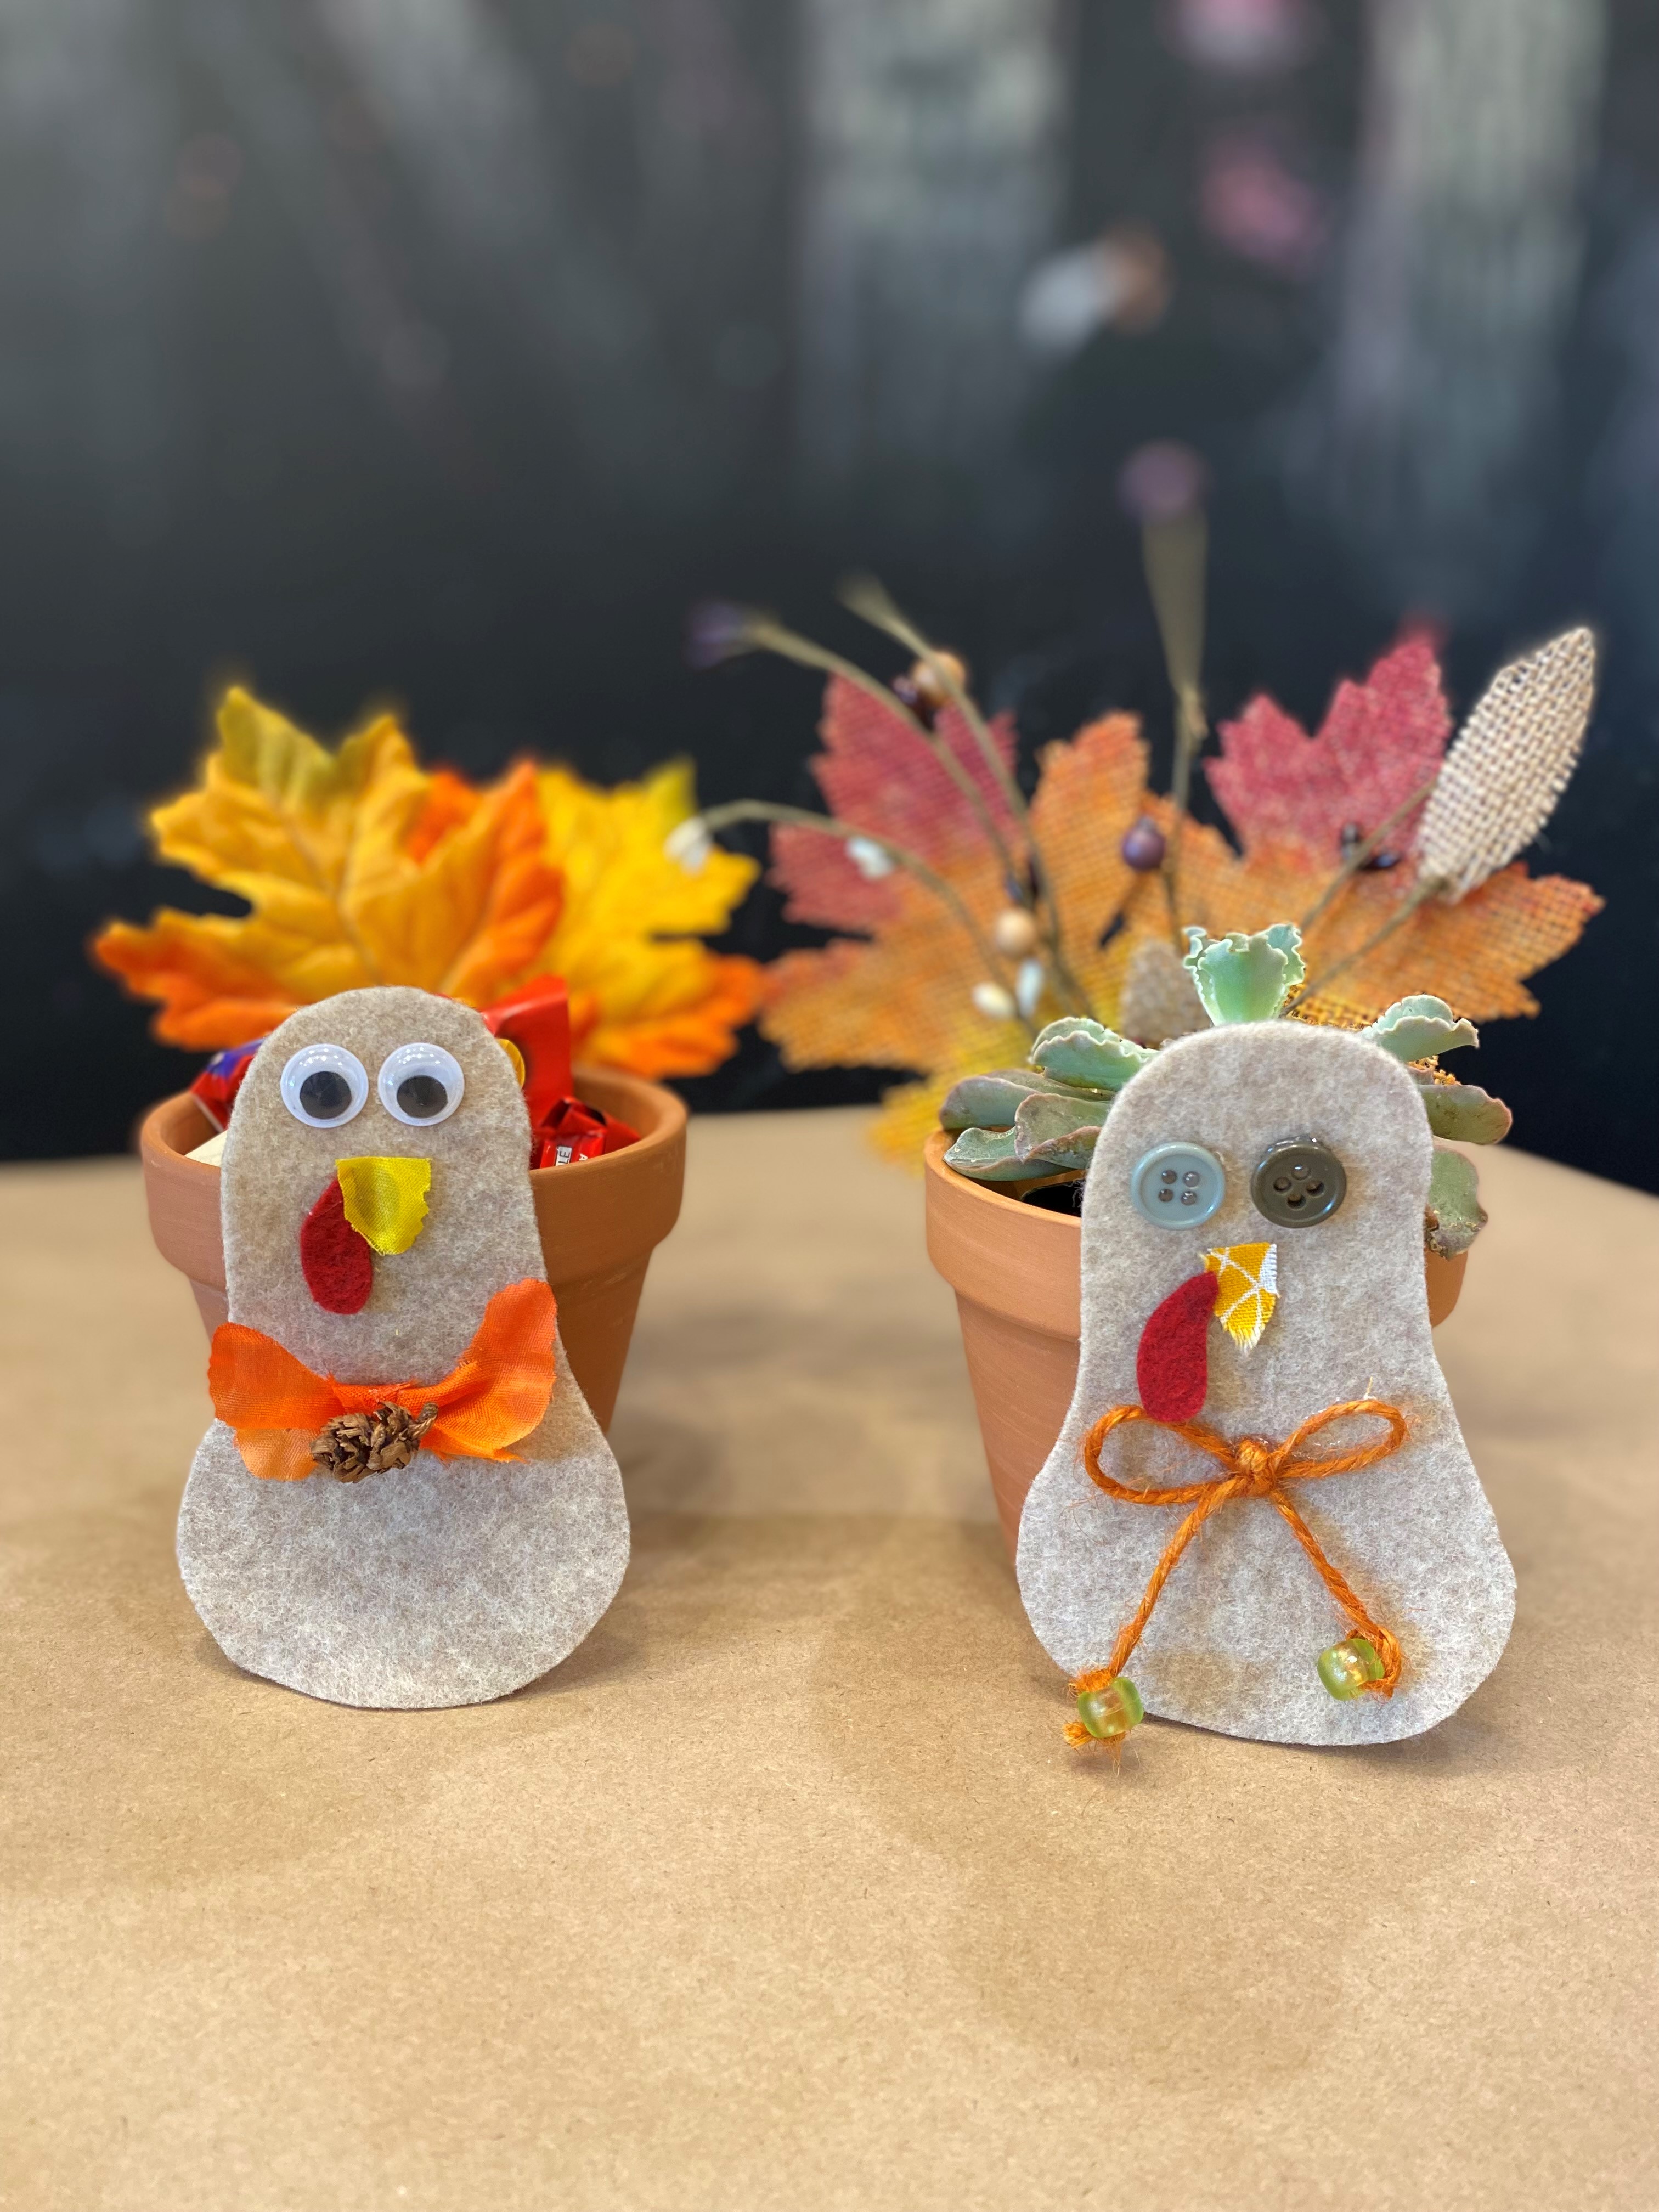 10+ Fun and Stylish Thanksgiving Crafts for Adults - Dwell Beautiful